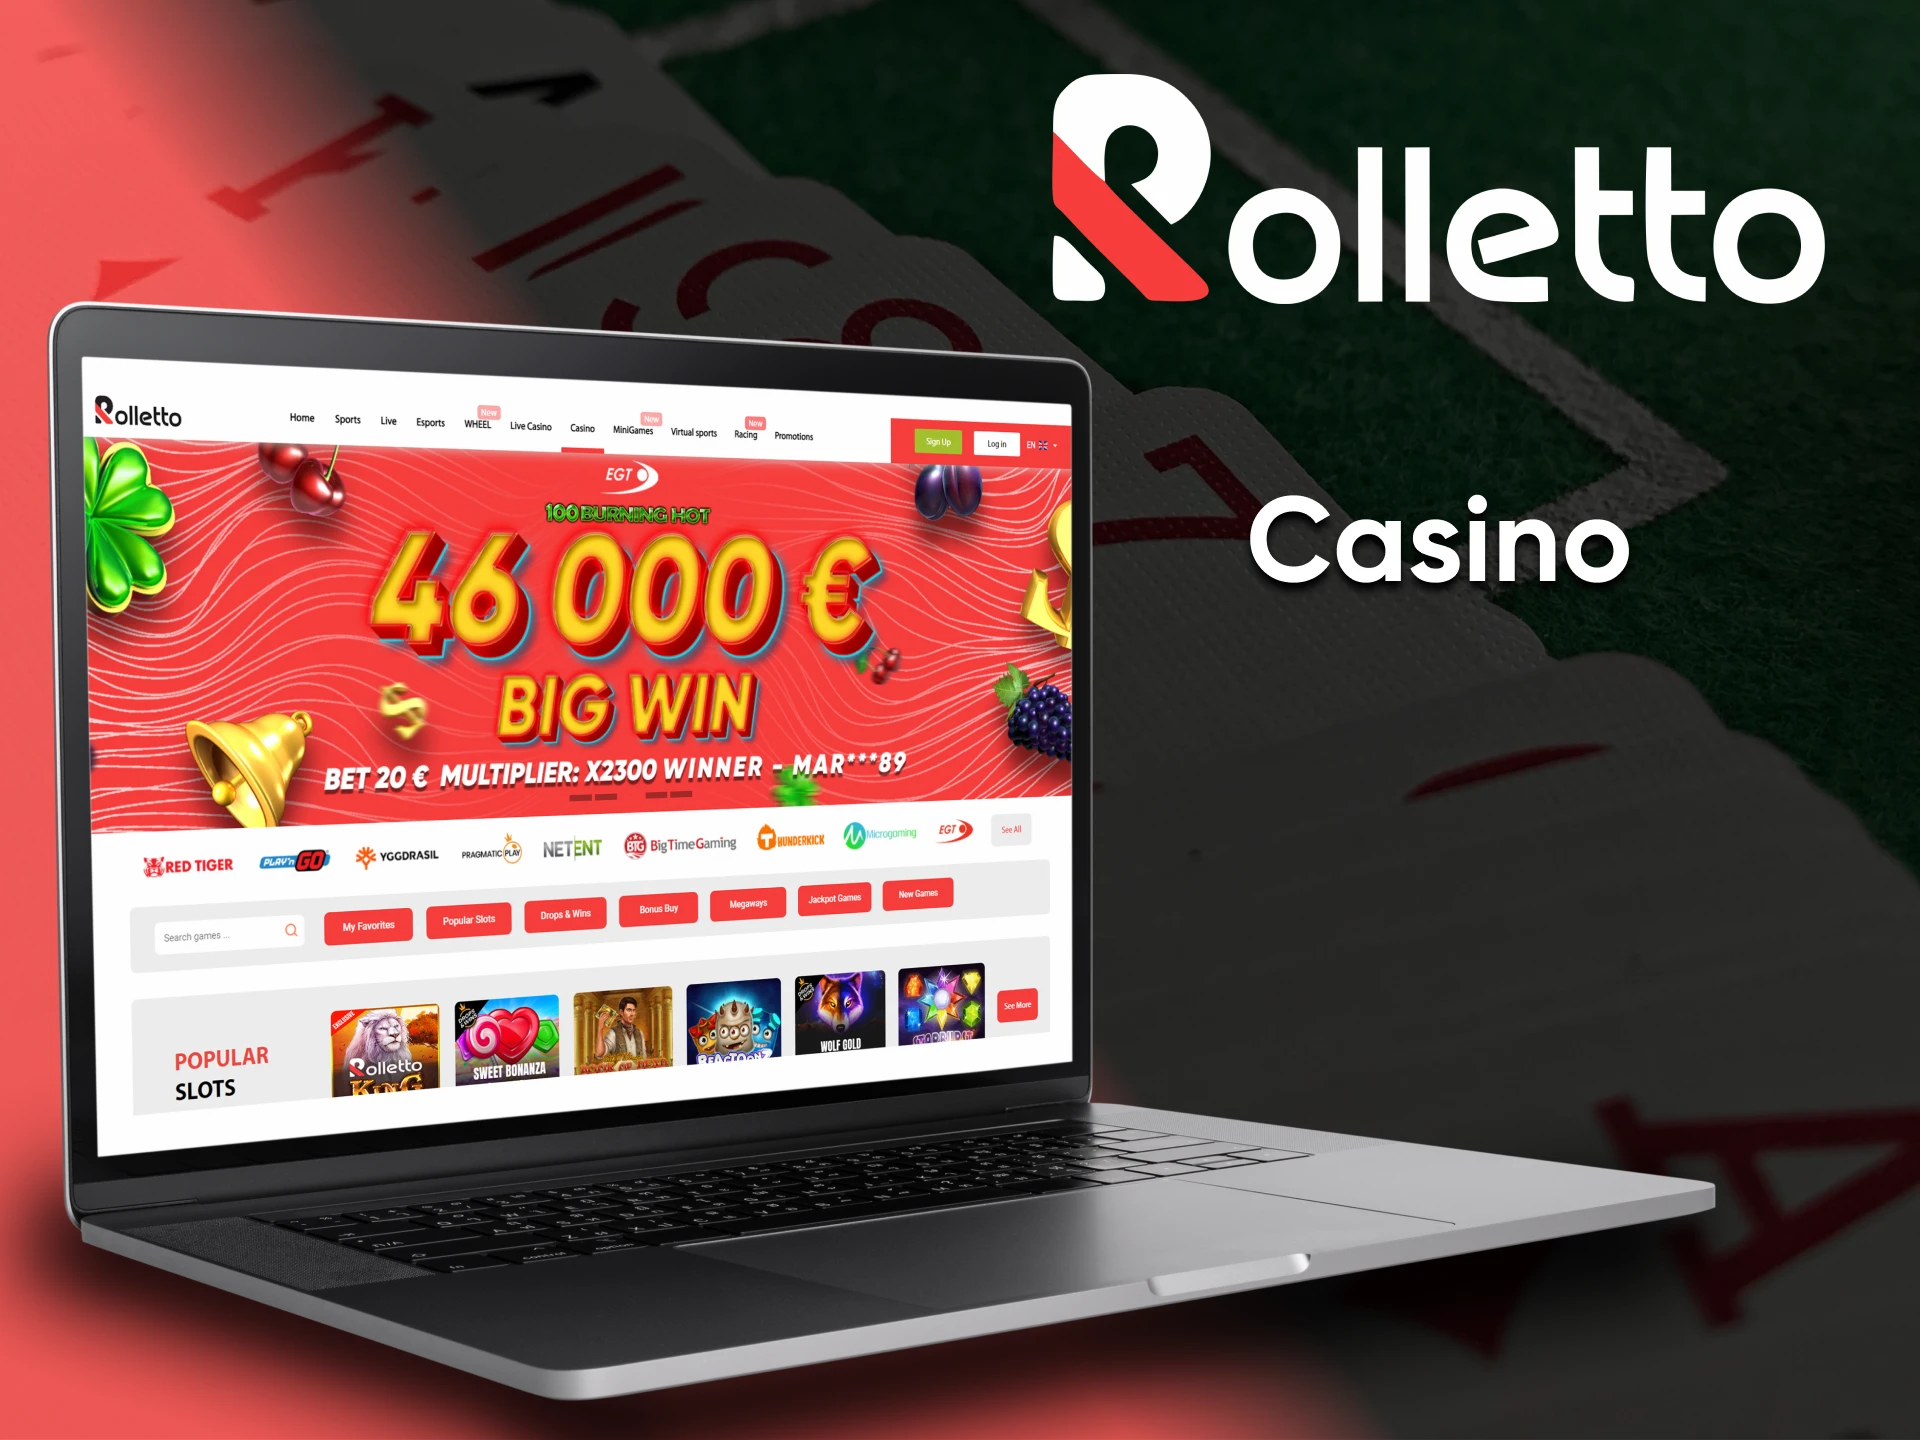 On the Rolletto website you can play many casino games.